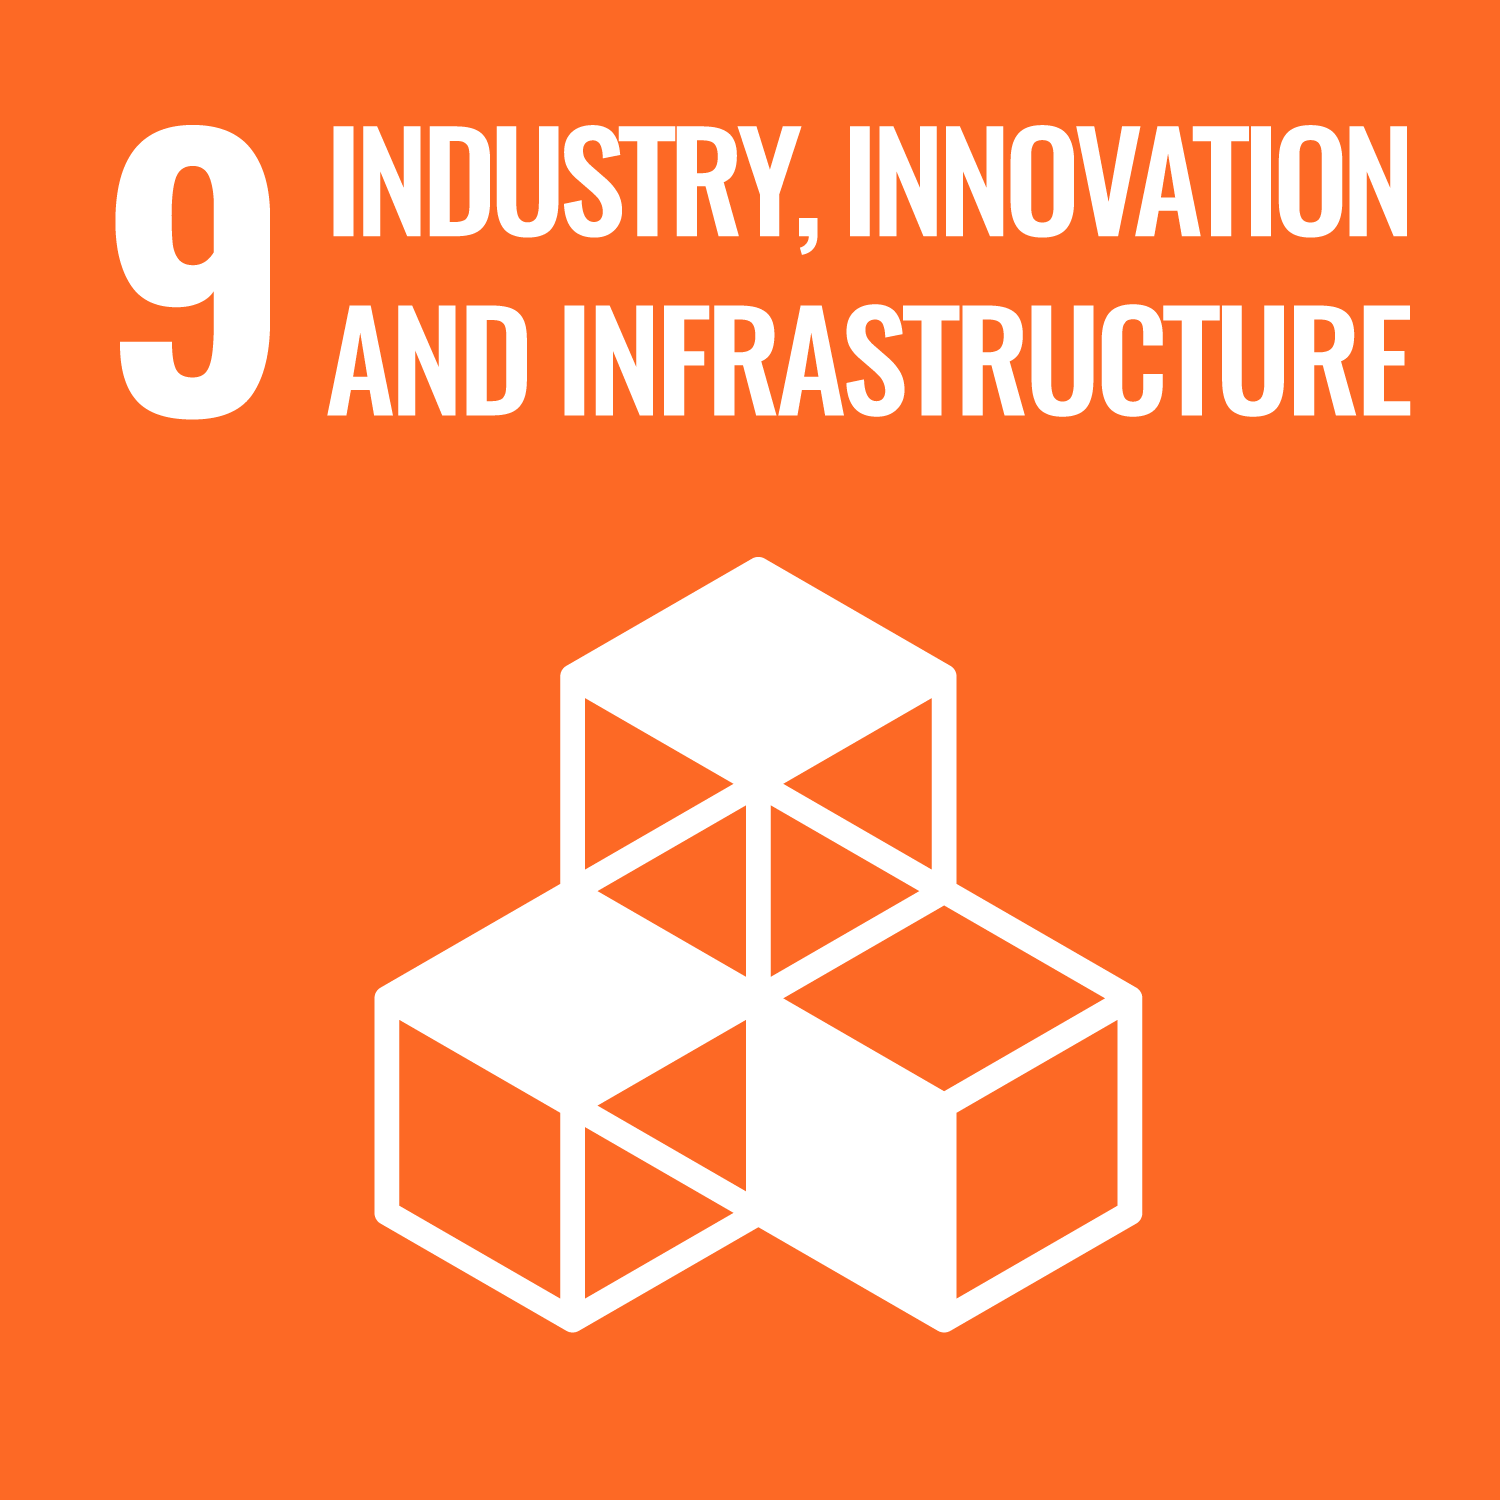 UN Sustainable Development Goal 9: Industry, Innovation, and Infrastructure